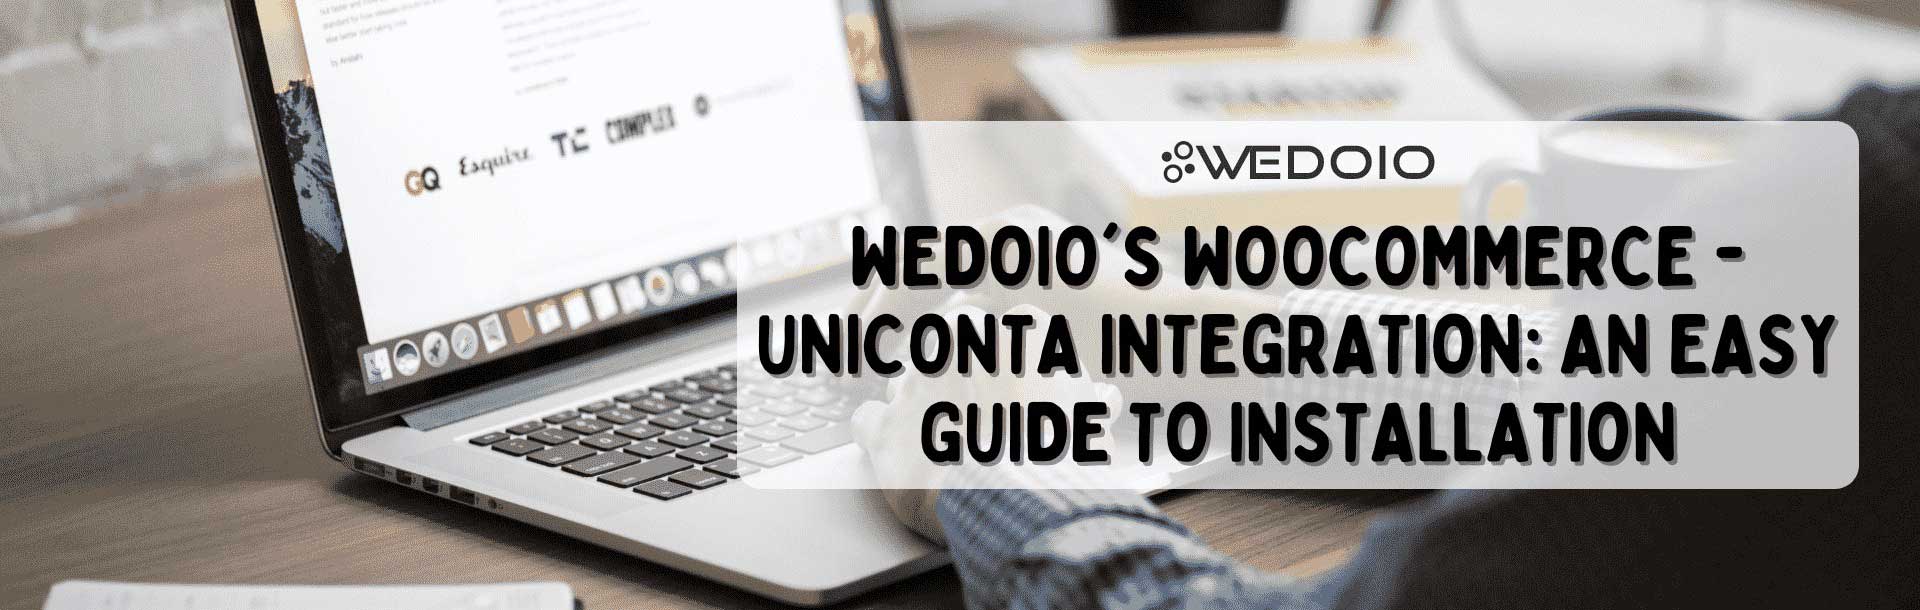 Wedoio's WooCommerce - Uniconta Integration: An Easy Guide